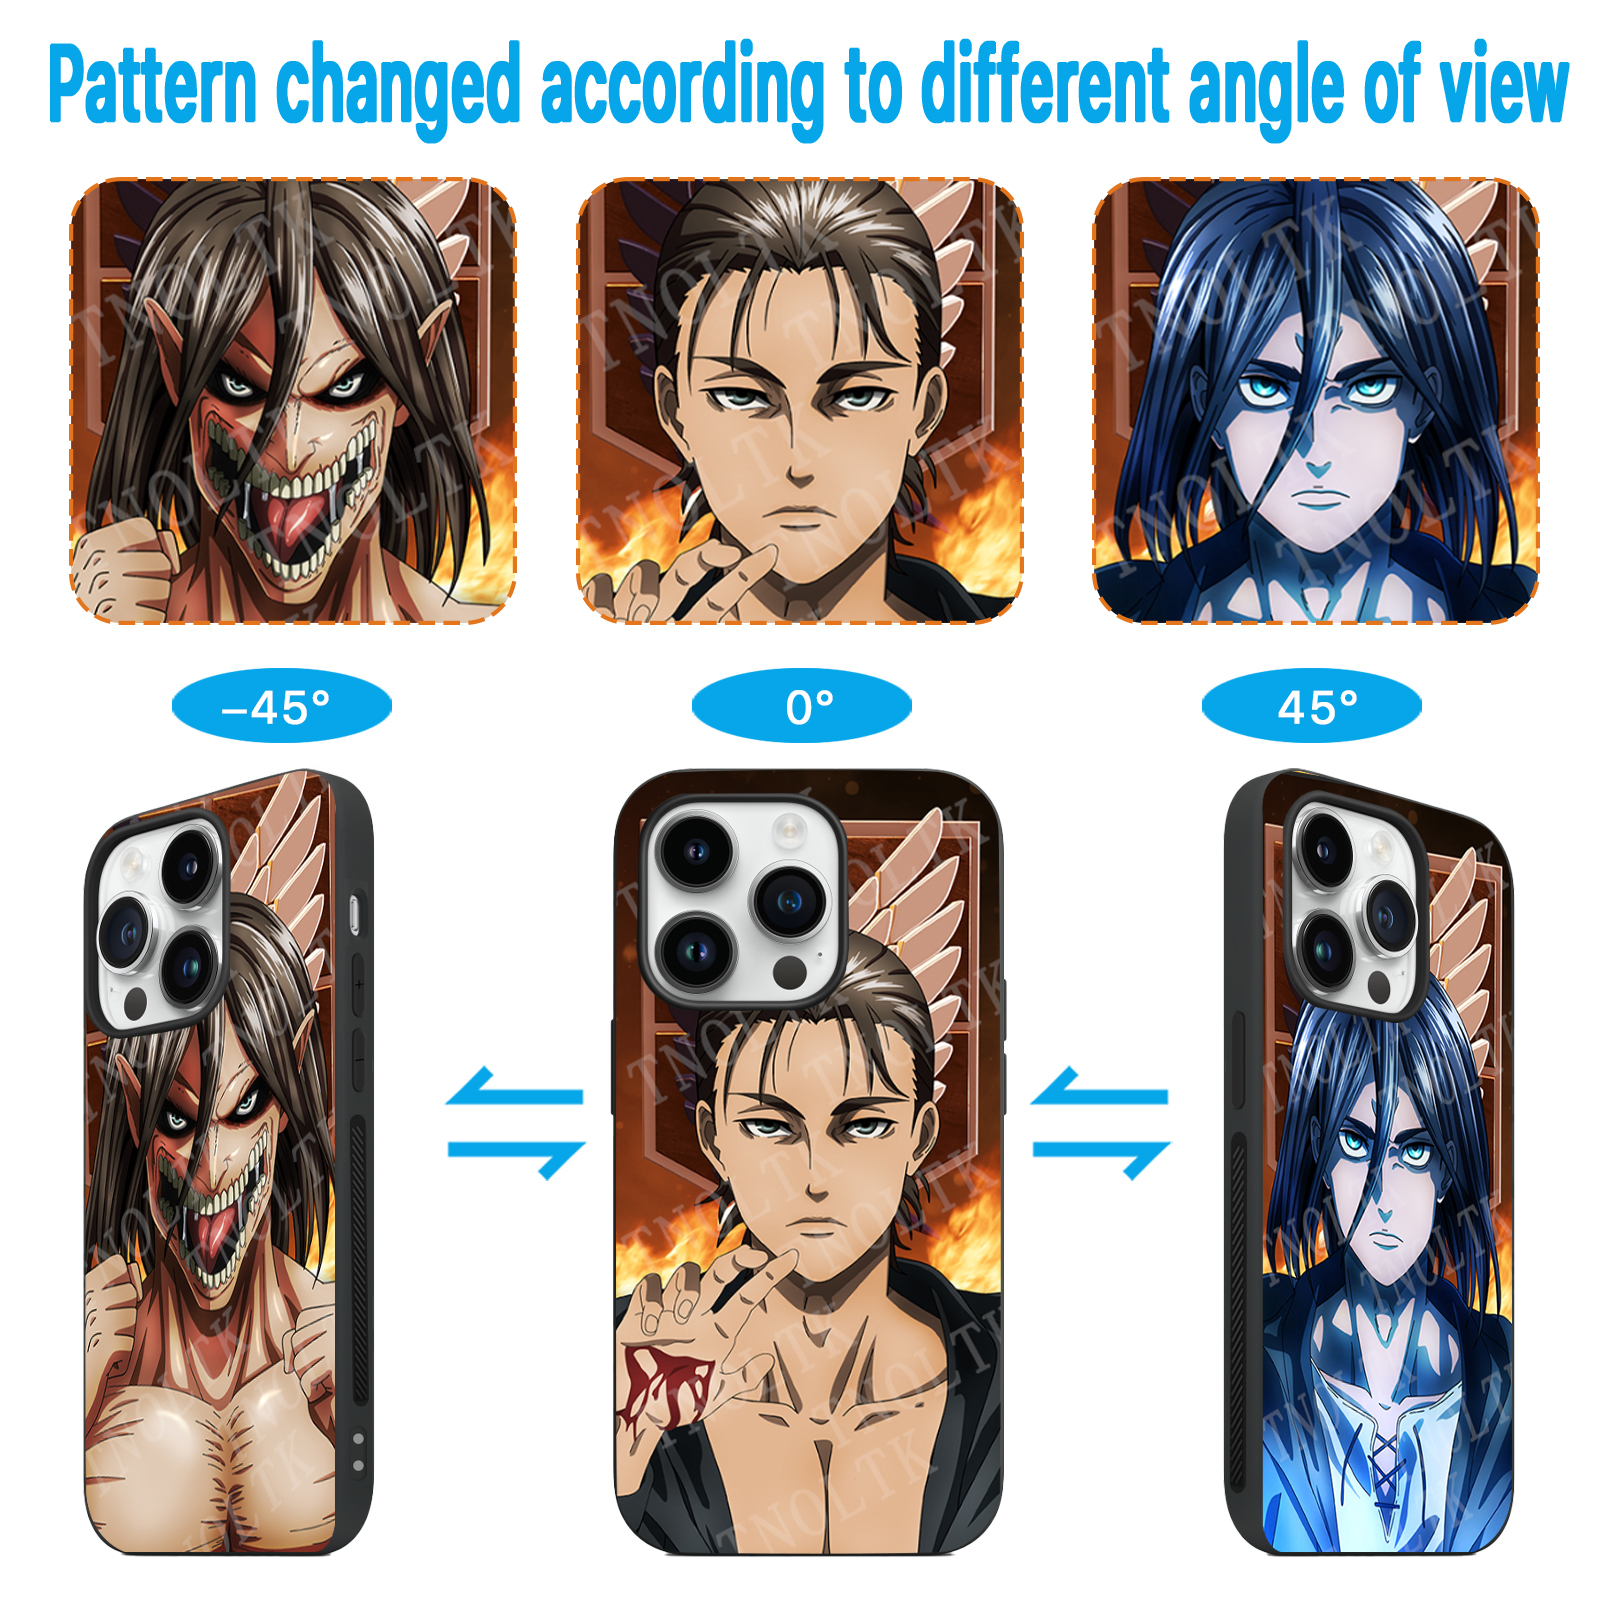 3D Motion iPhone Attack on Titan Anime Phone Cases